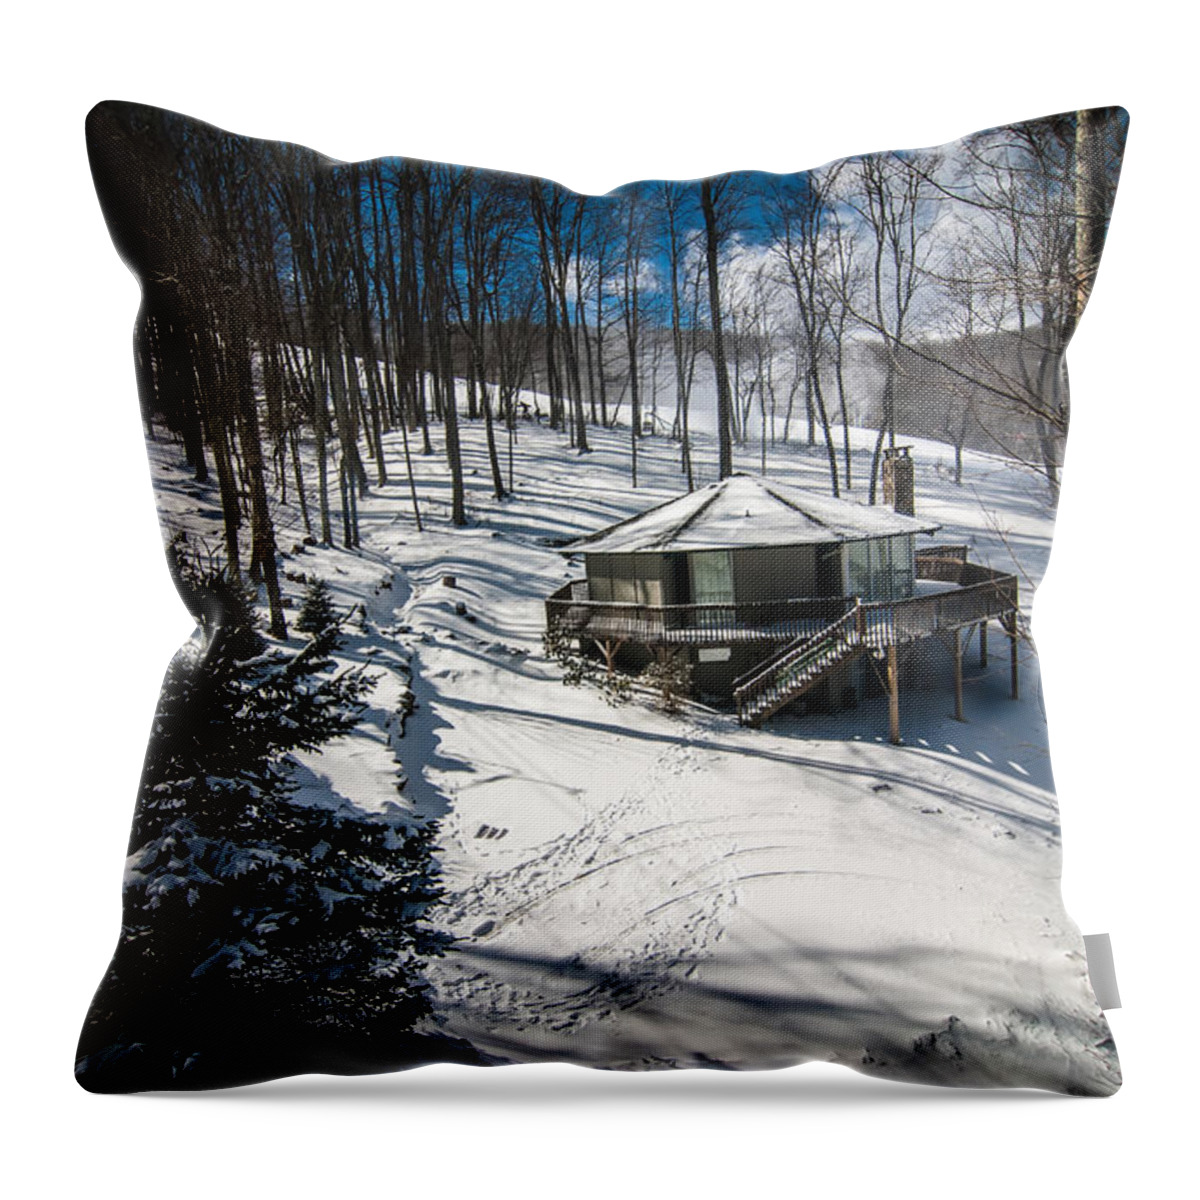 People Throw Pillow featuring the photograph At The Ski Resort by Alex Grichenko